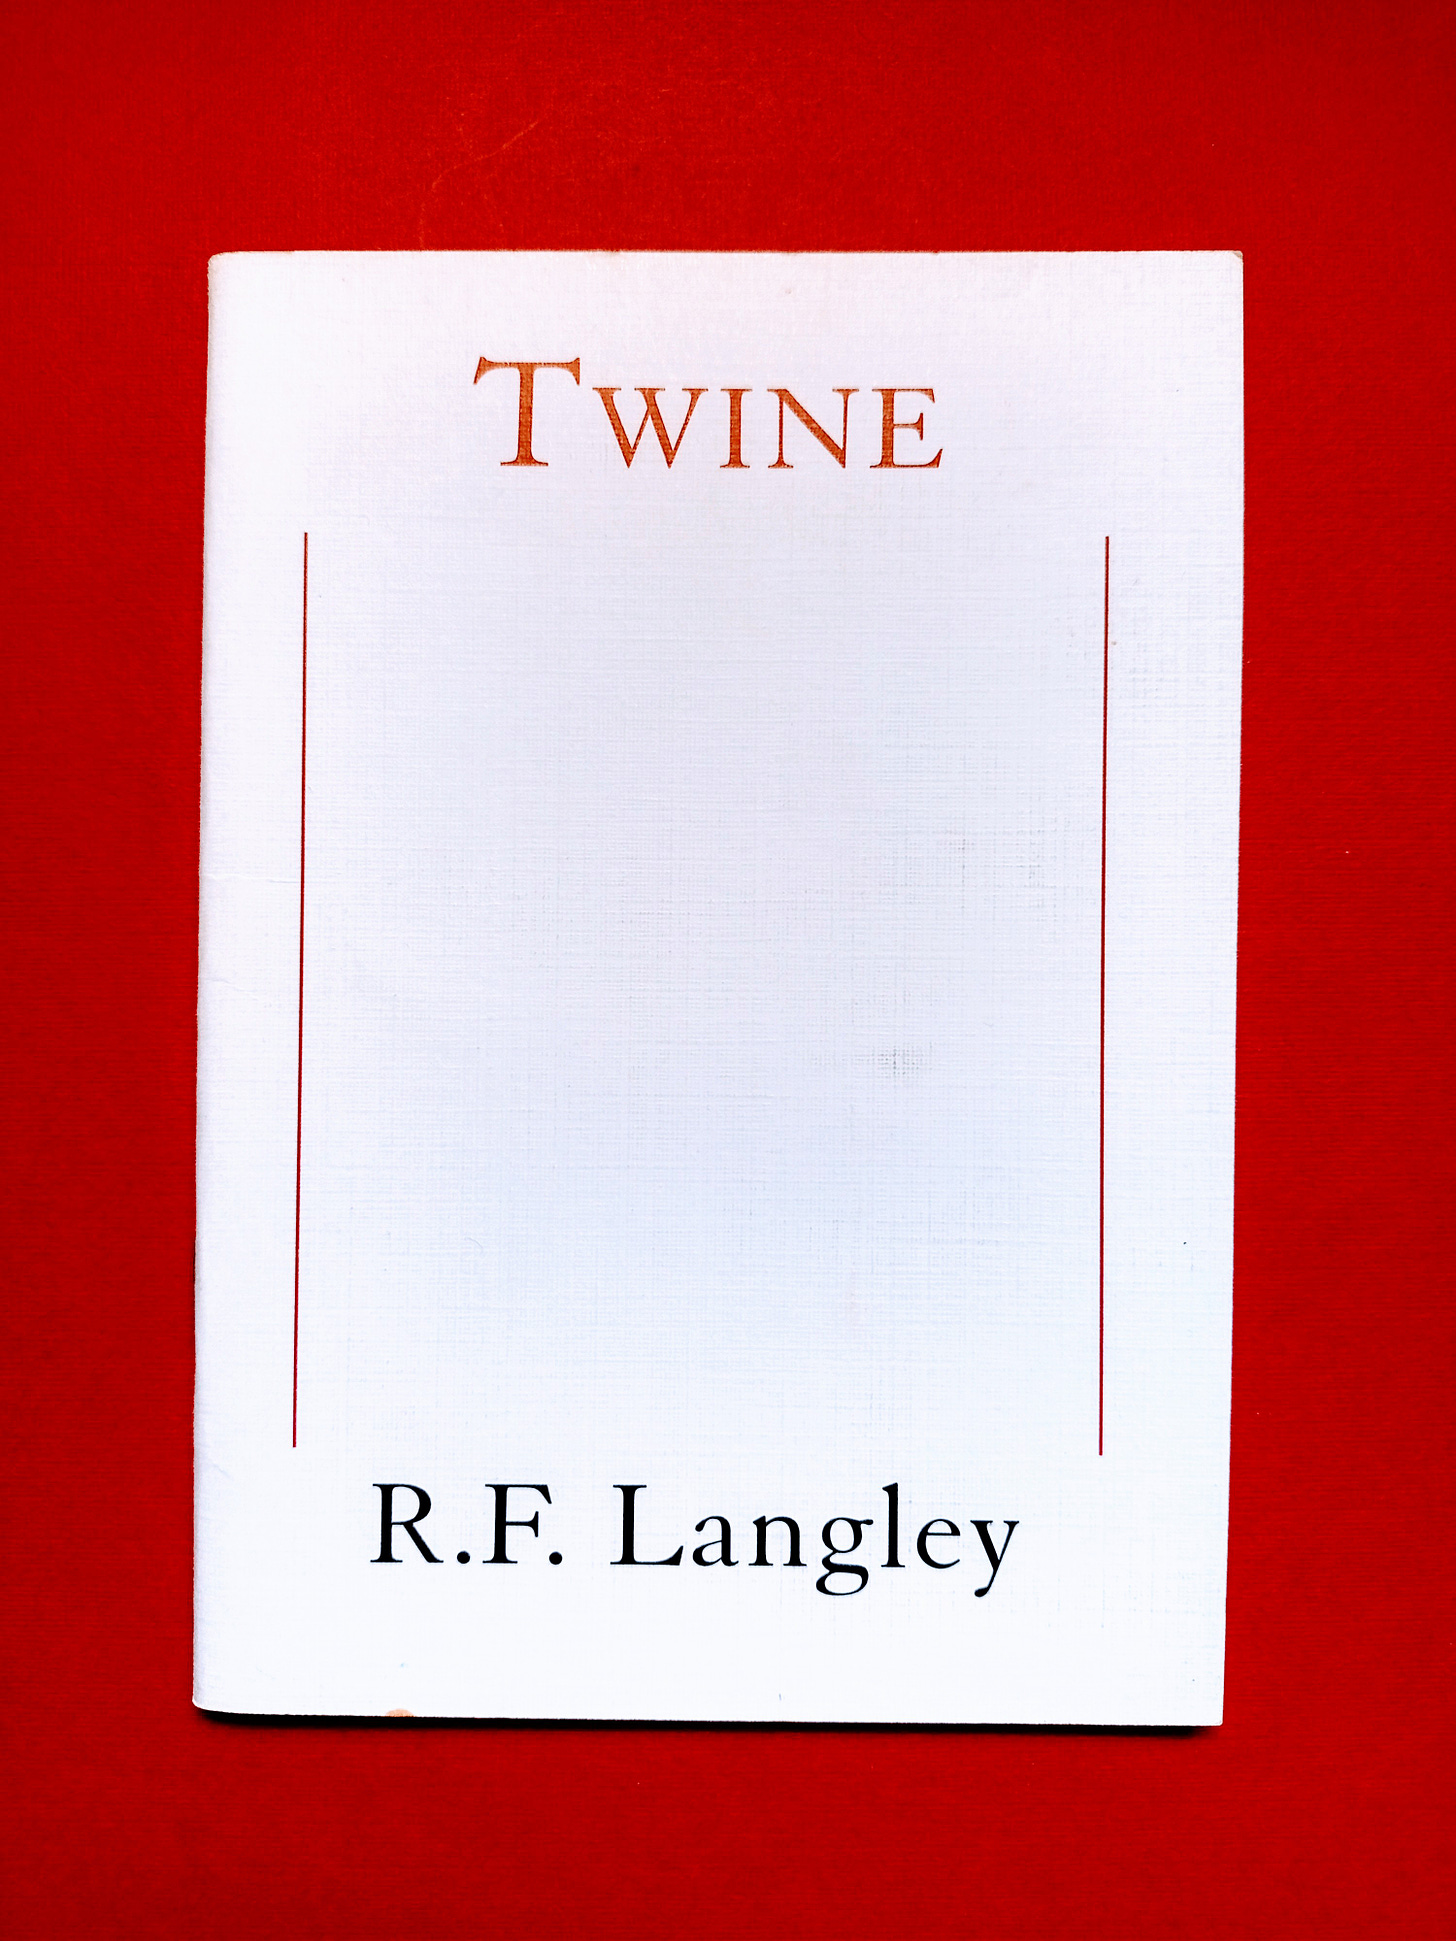 A small rectangular white pamphlet on a red background: the title in red at the top is TWINE and the author (at the bottom) is R.F. Langley. Title and author are centred and joined by two red parallel lines enclosing a blank space.